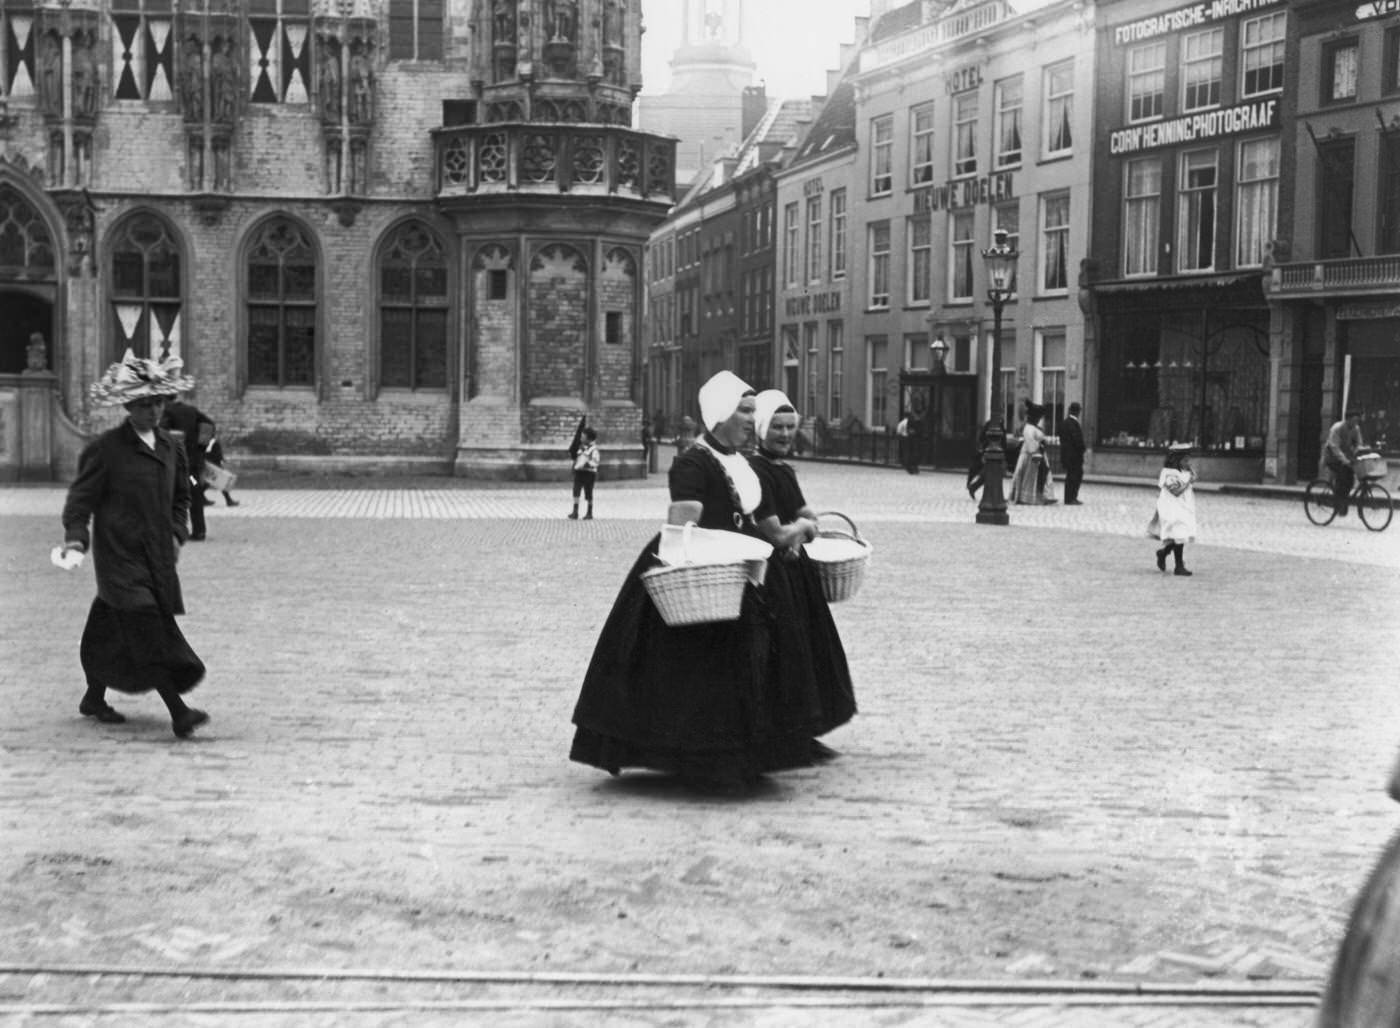 Pair of Dutch women carrying baskets crossing a town square, Netherlands, 1900